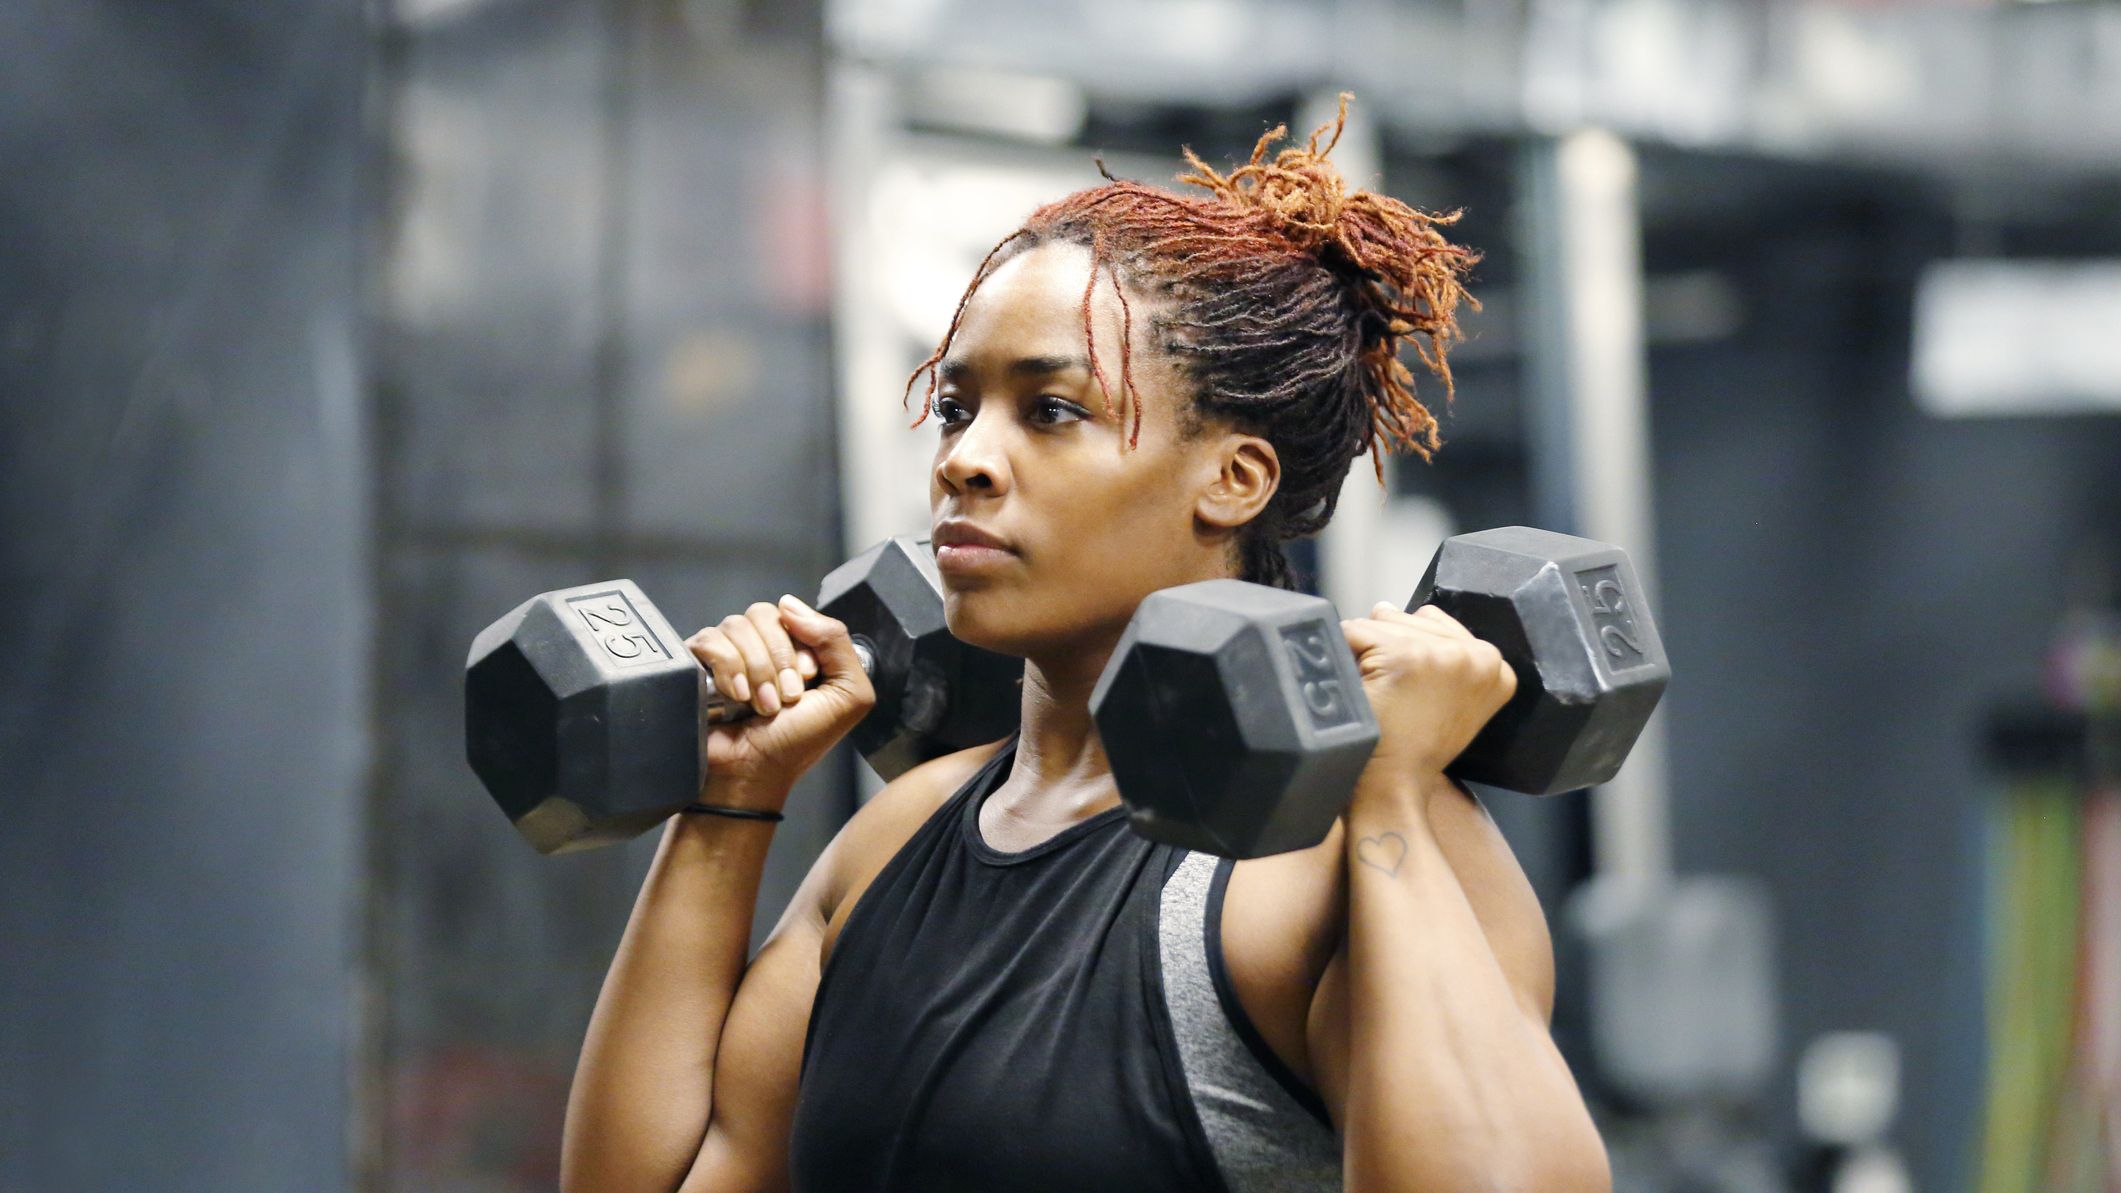 https://hips.hearstapps.com/hmg-prod/images/fit-young-african-american-woman-working-out-with-royalty-free-image-1693934974.jpg?crop=1xw:0.84375xh;center,top